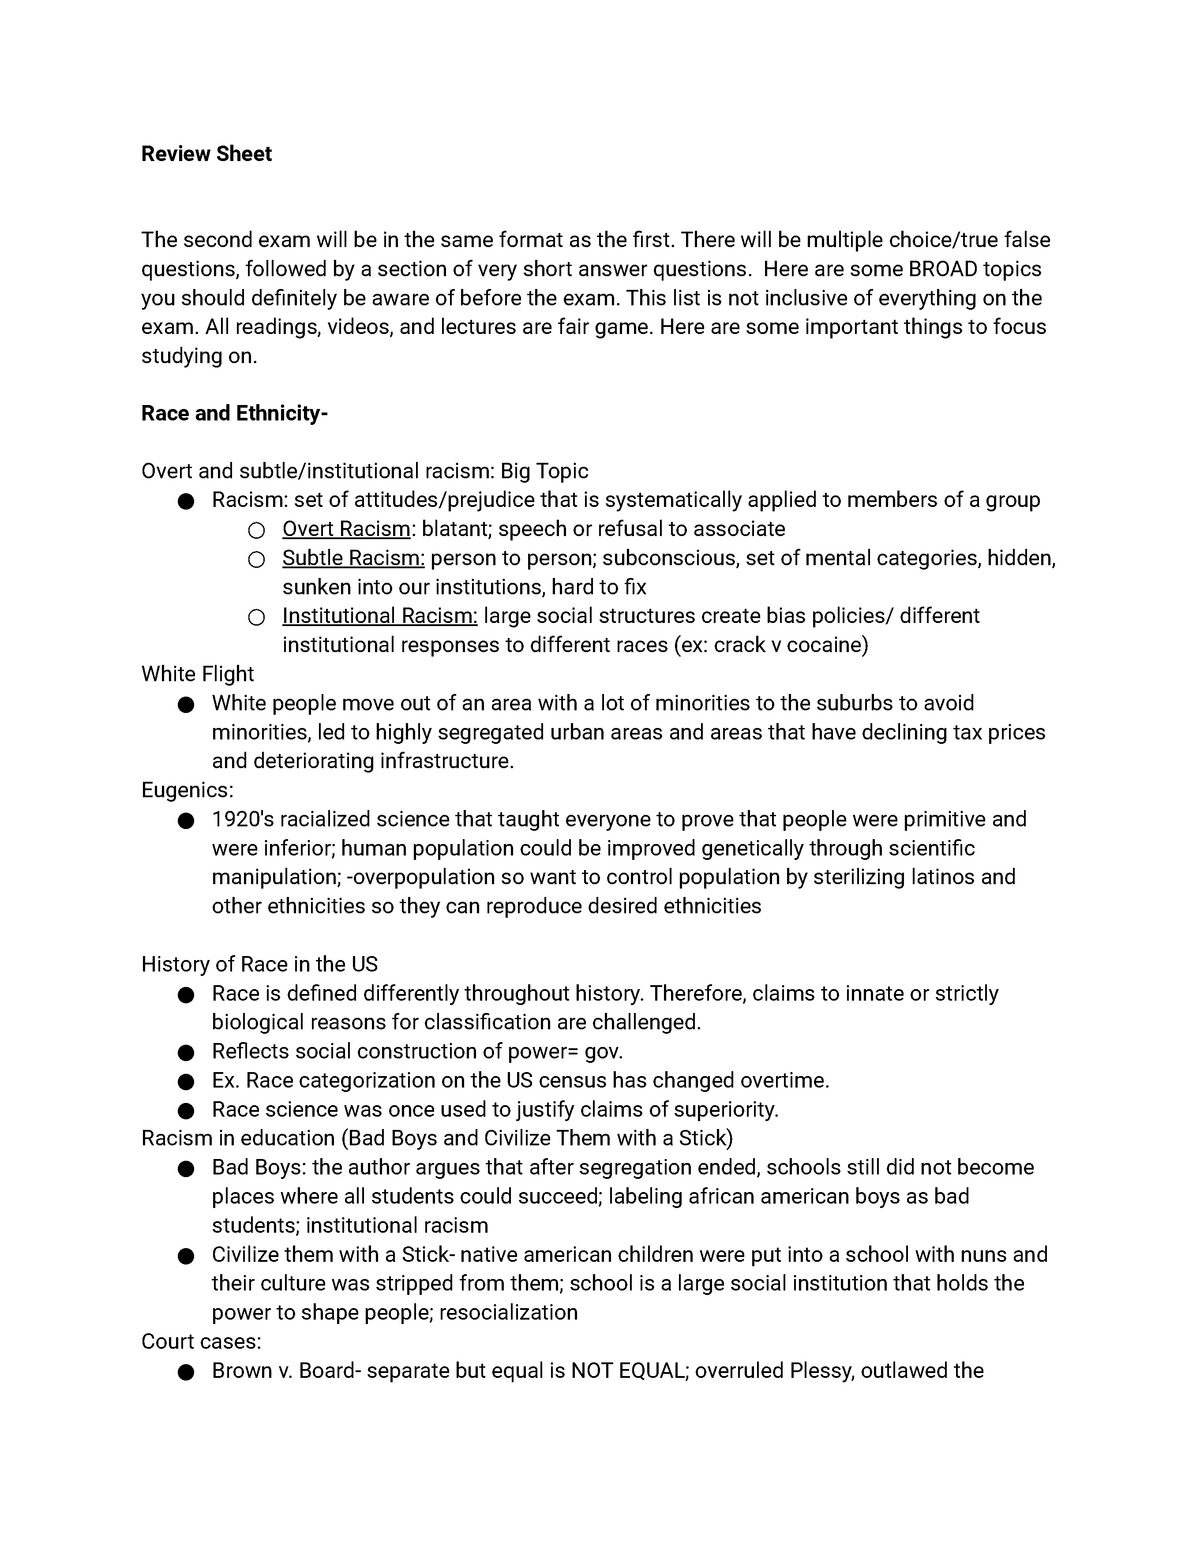 SOC 101 Final - Review Sheet The second exam will be in the same format ...